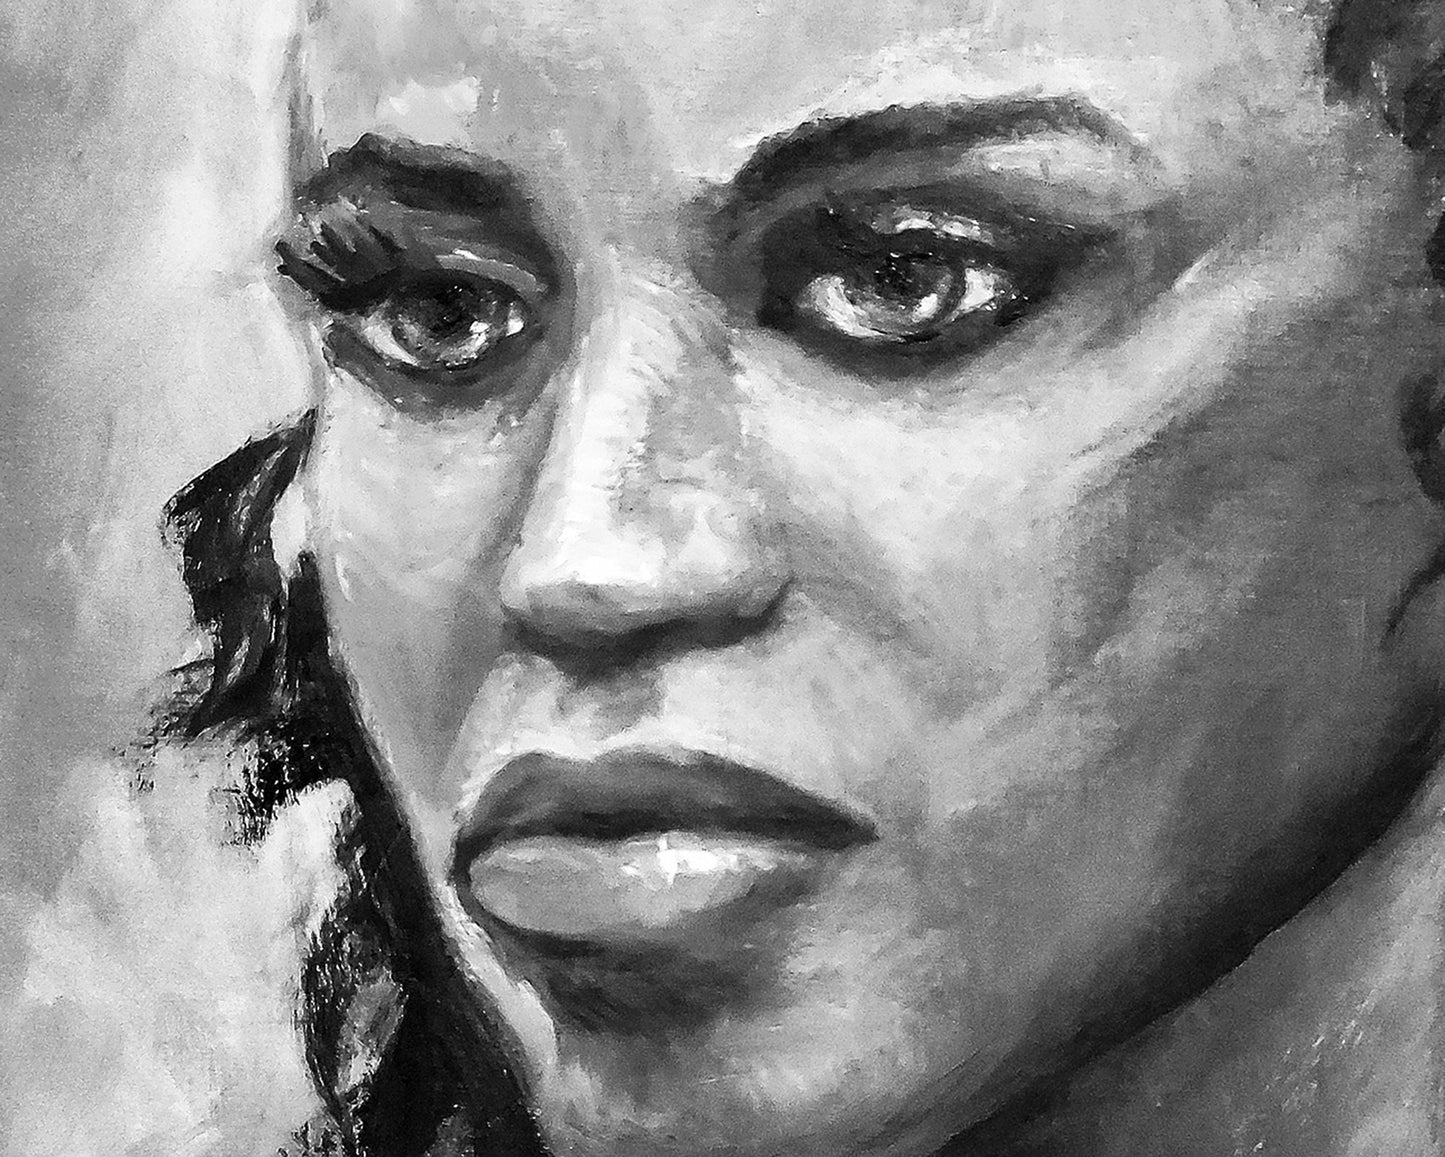 Hand Painted, Custom Oil Portrait in Black and White